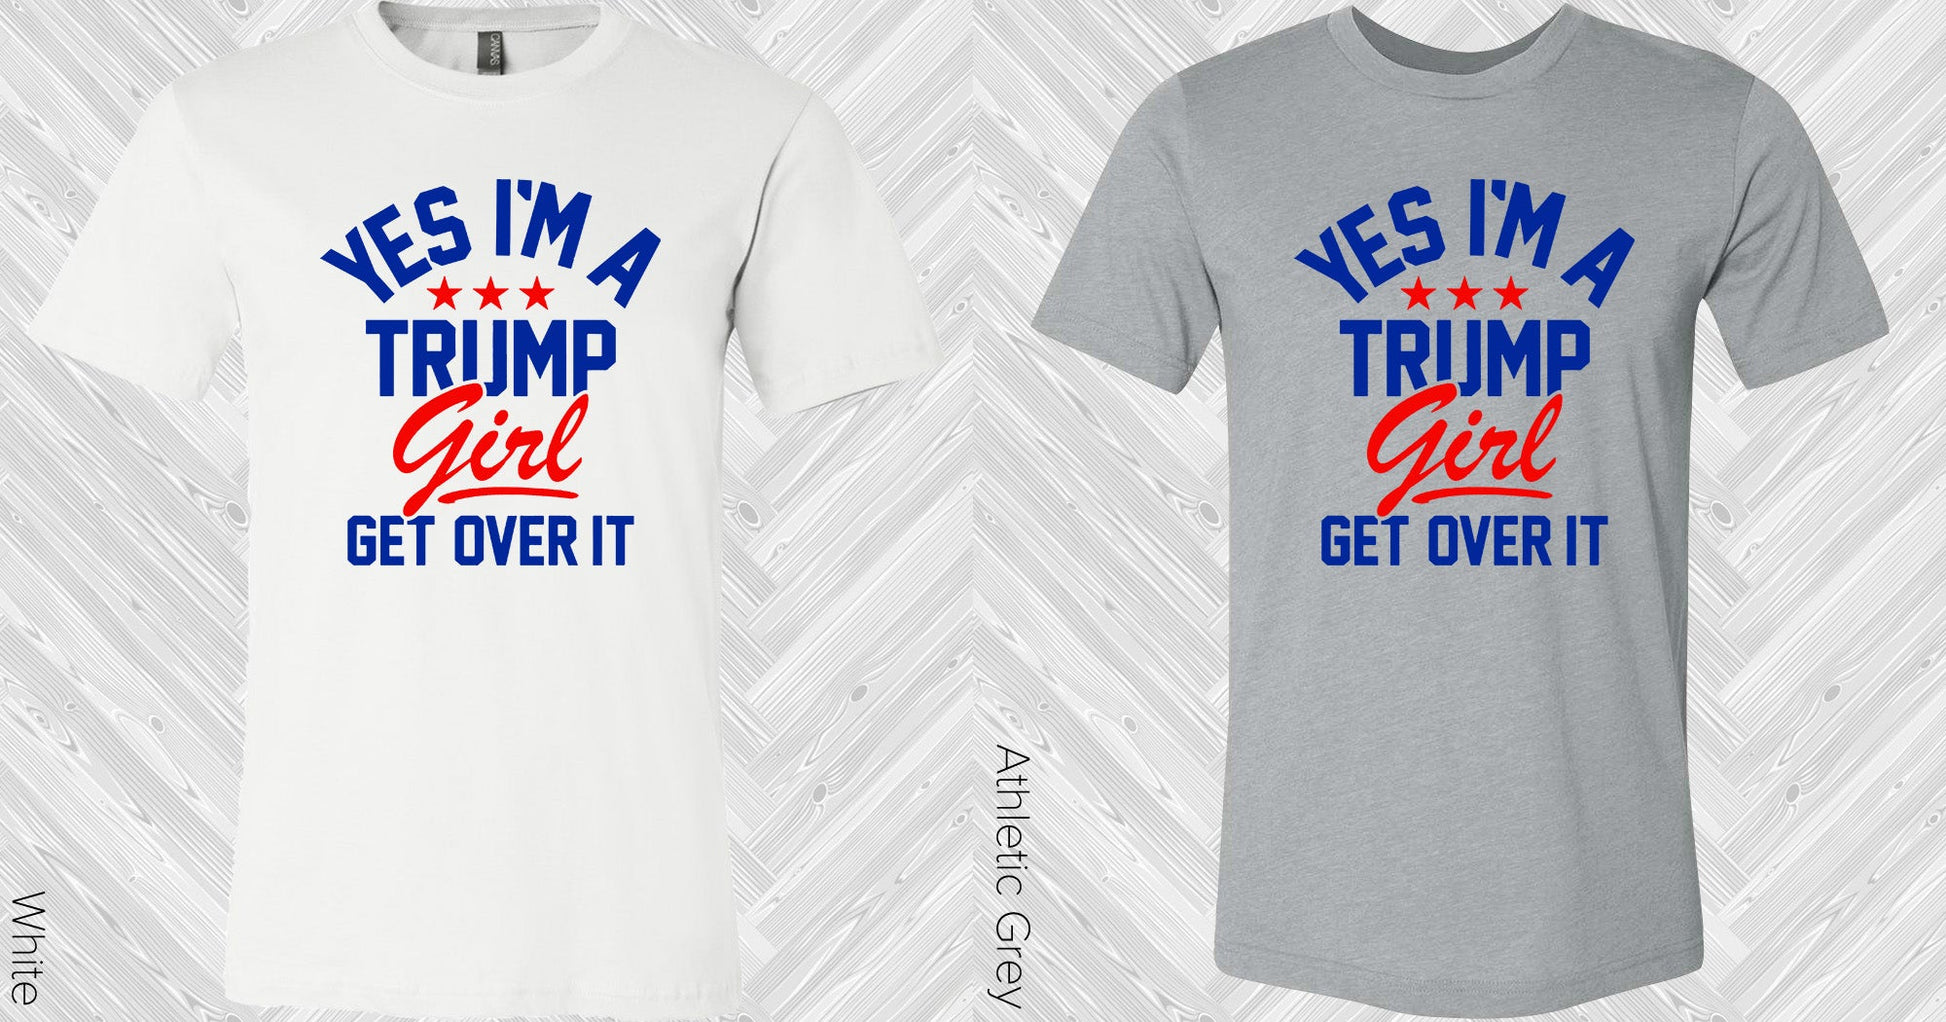 Yes Im A Trump Girl Get Over It Graphic Tee Graphic Tee